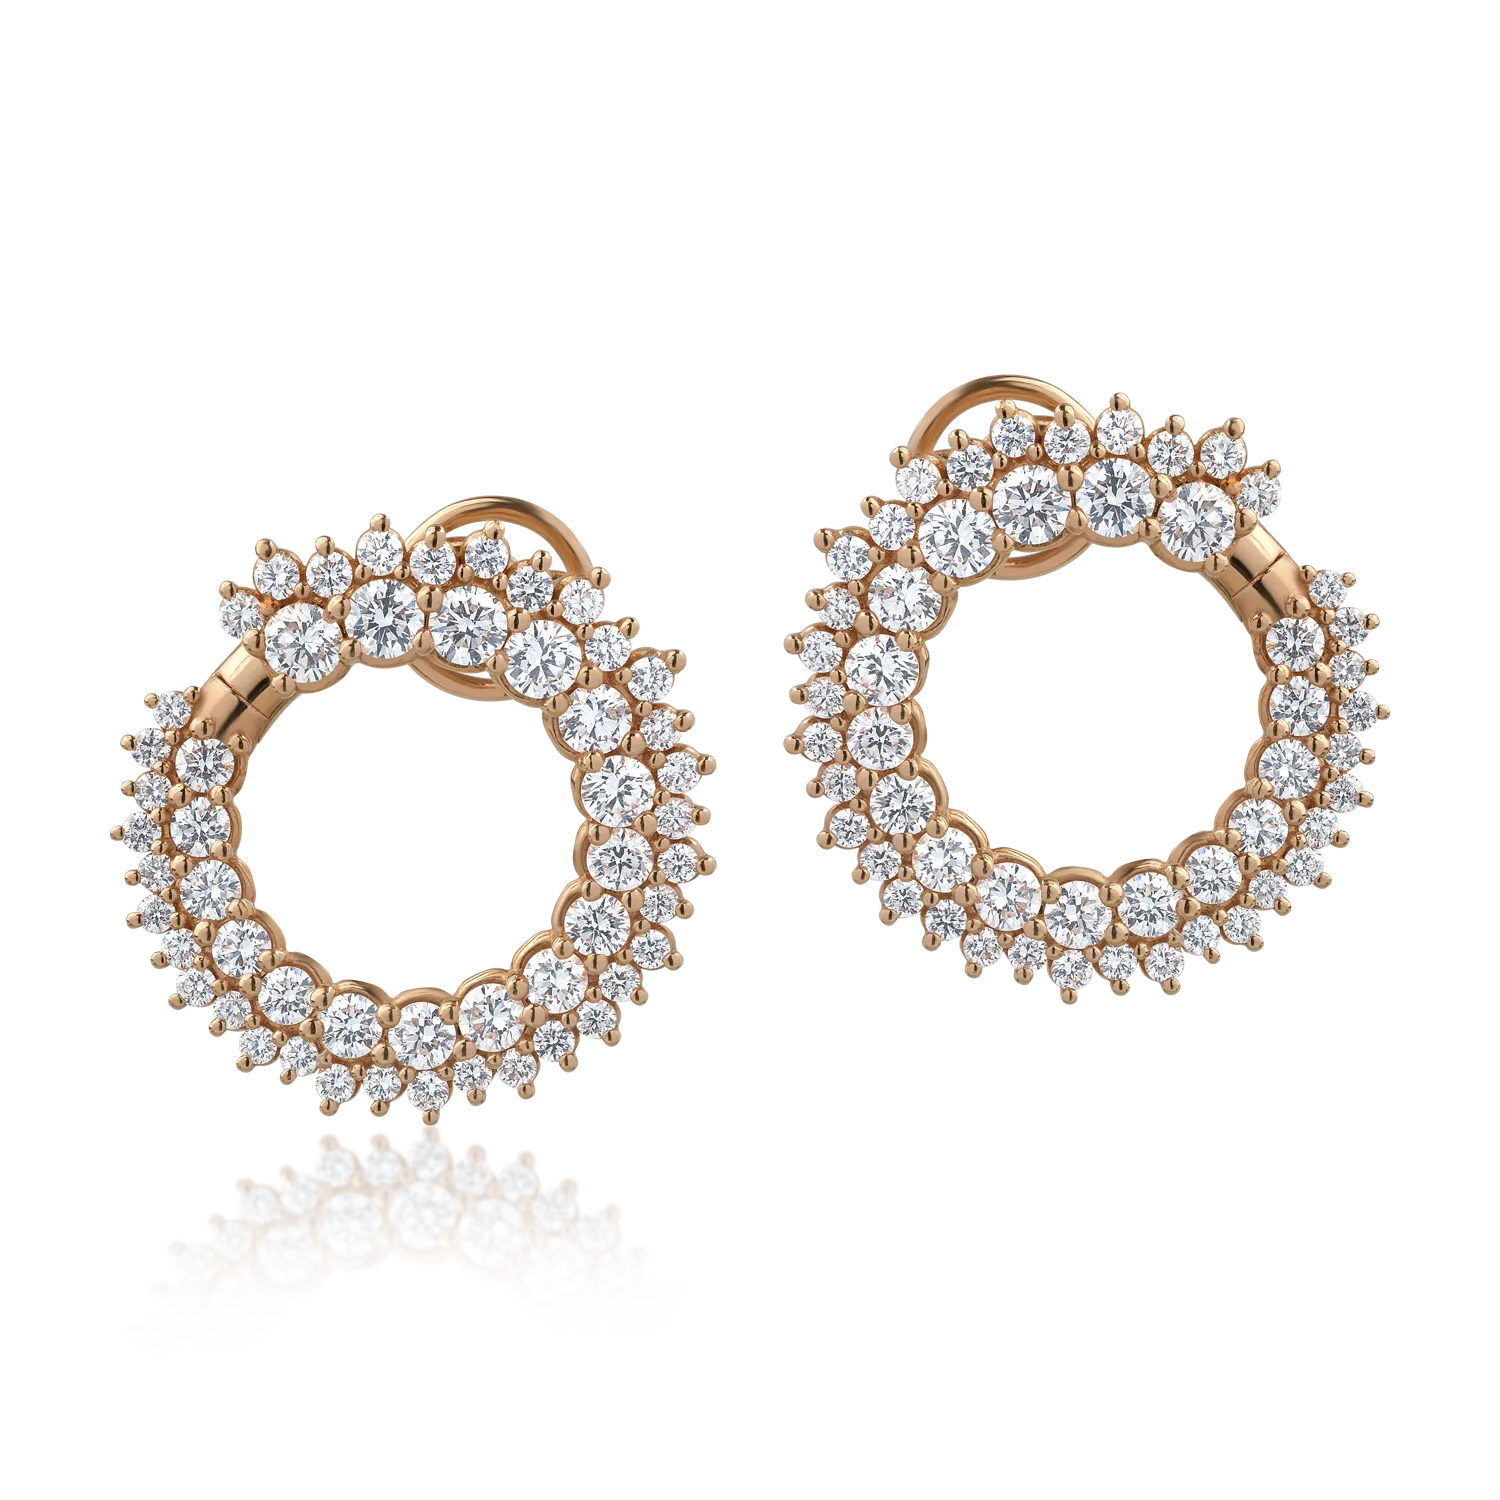 18K rose gold earrings with 2.16ct diamonds